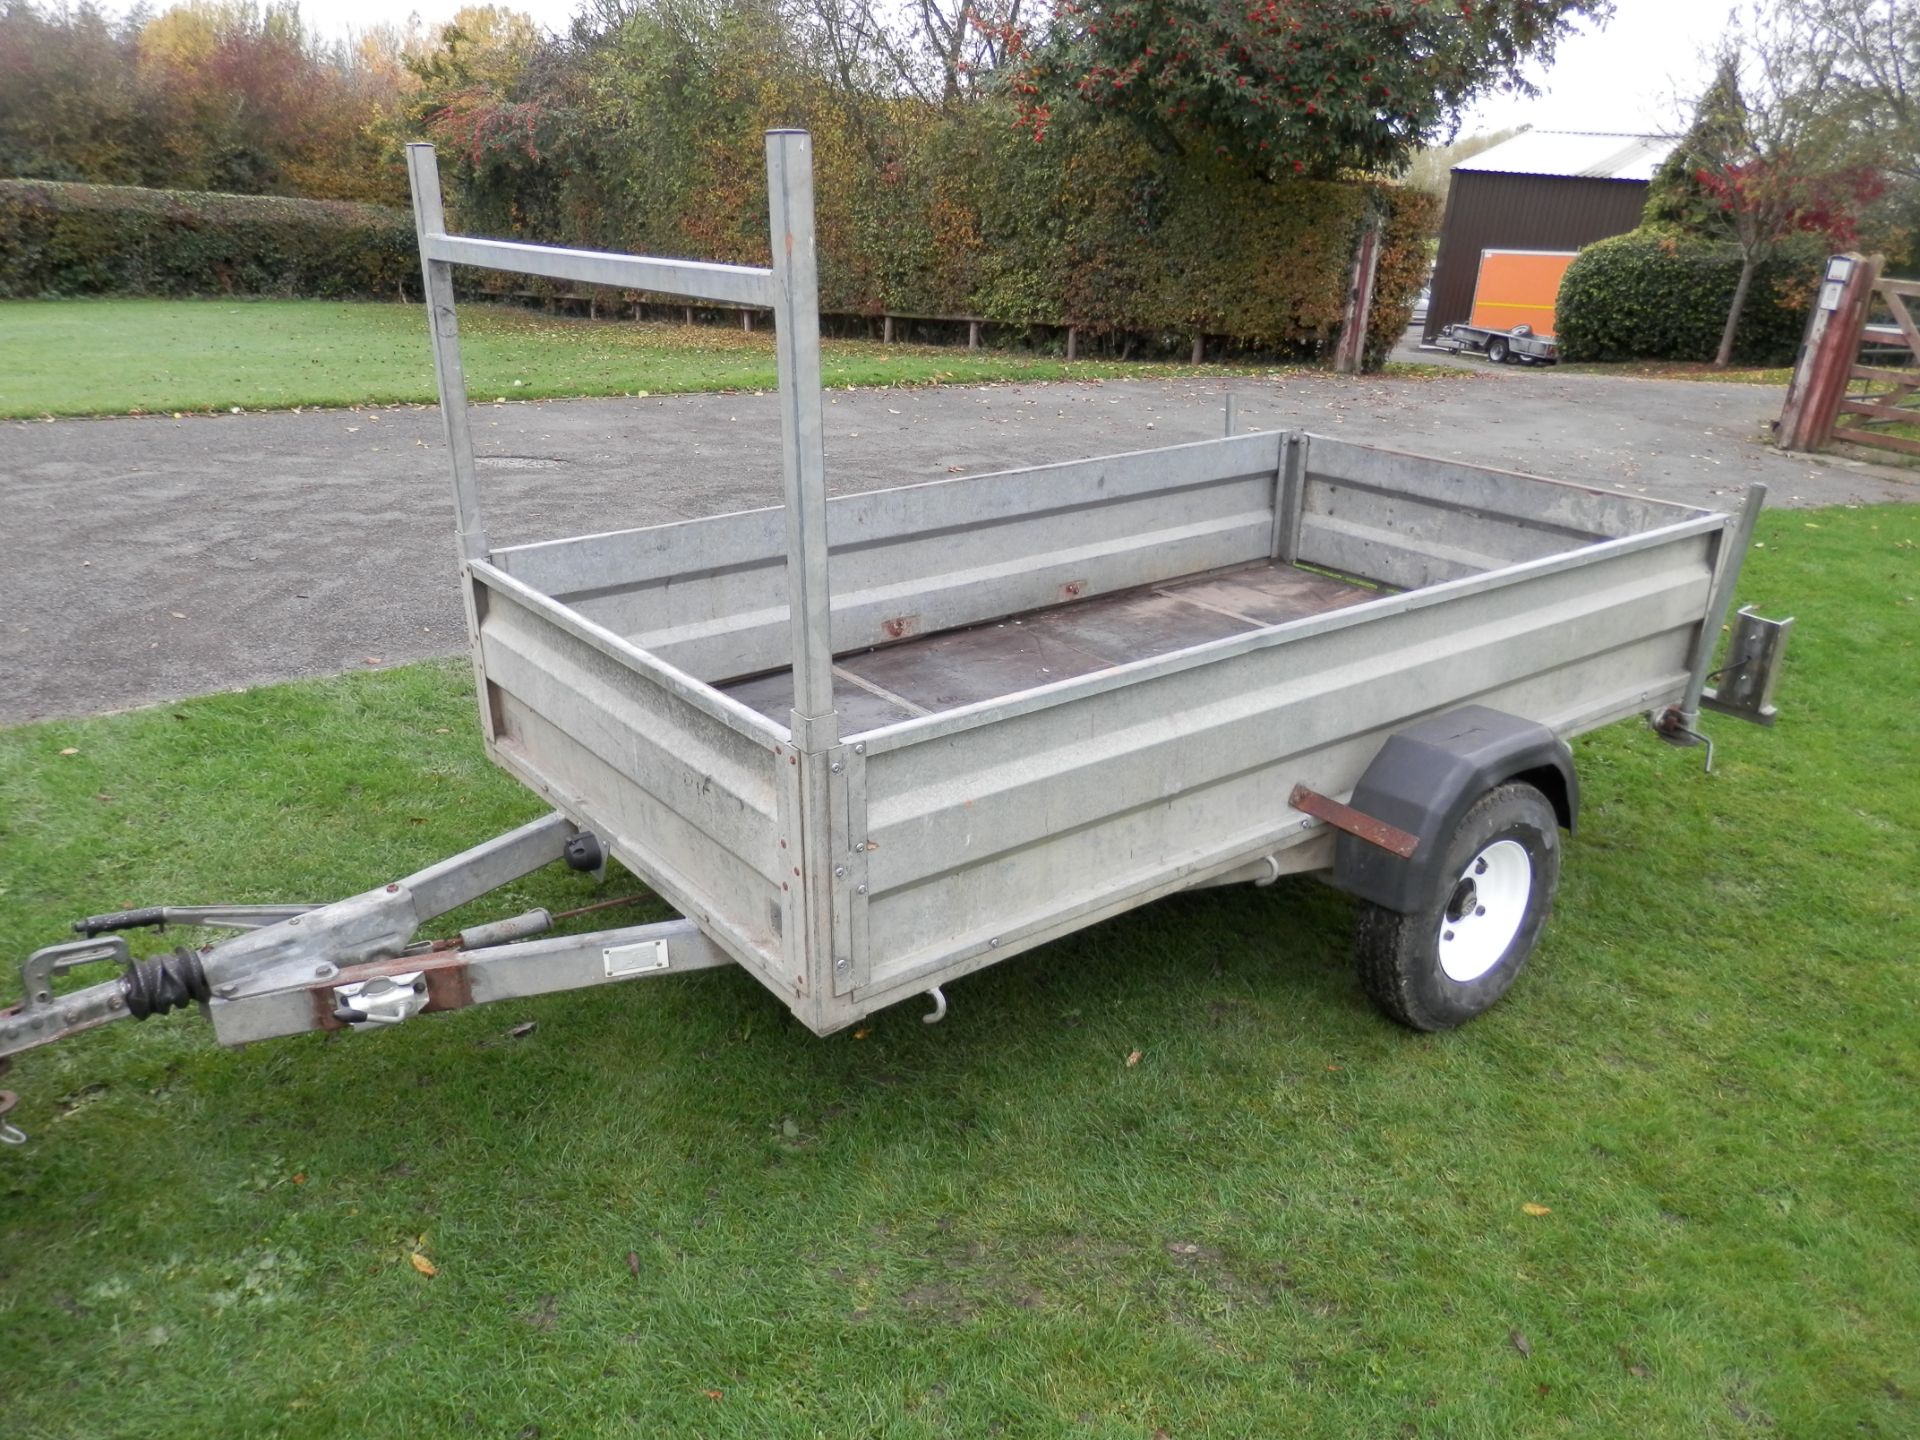 GOOD SOLID 8 X 4' GALVANIZED TRAILER, 1.5 TONNE. DROP REAR FOR EASY LOADING. - Image 7 of 9